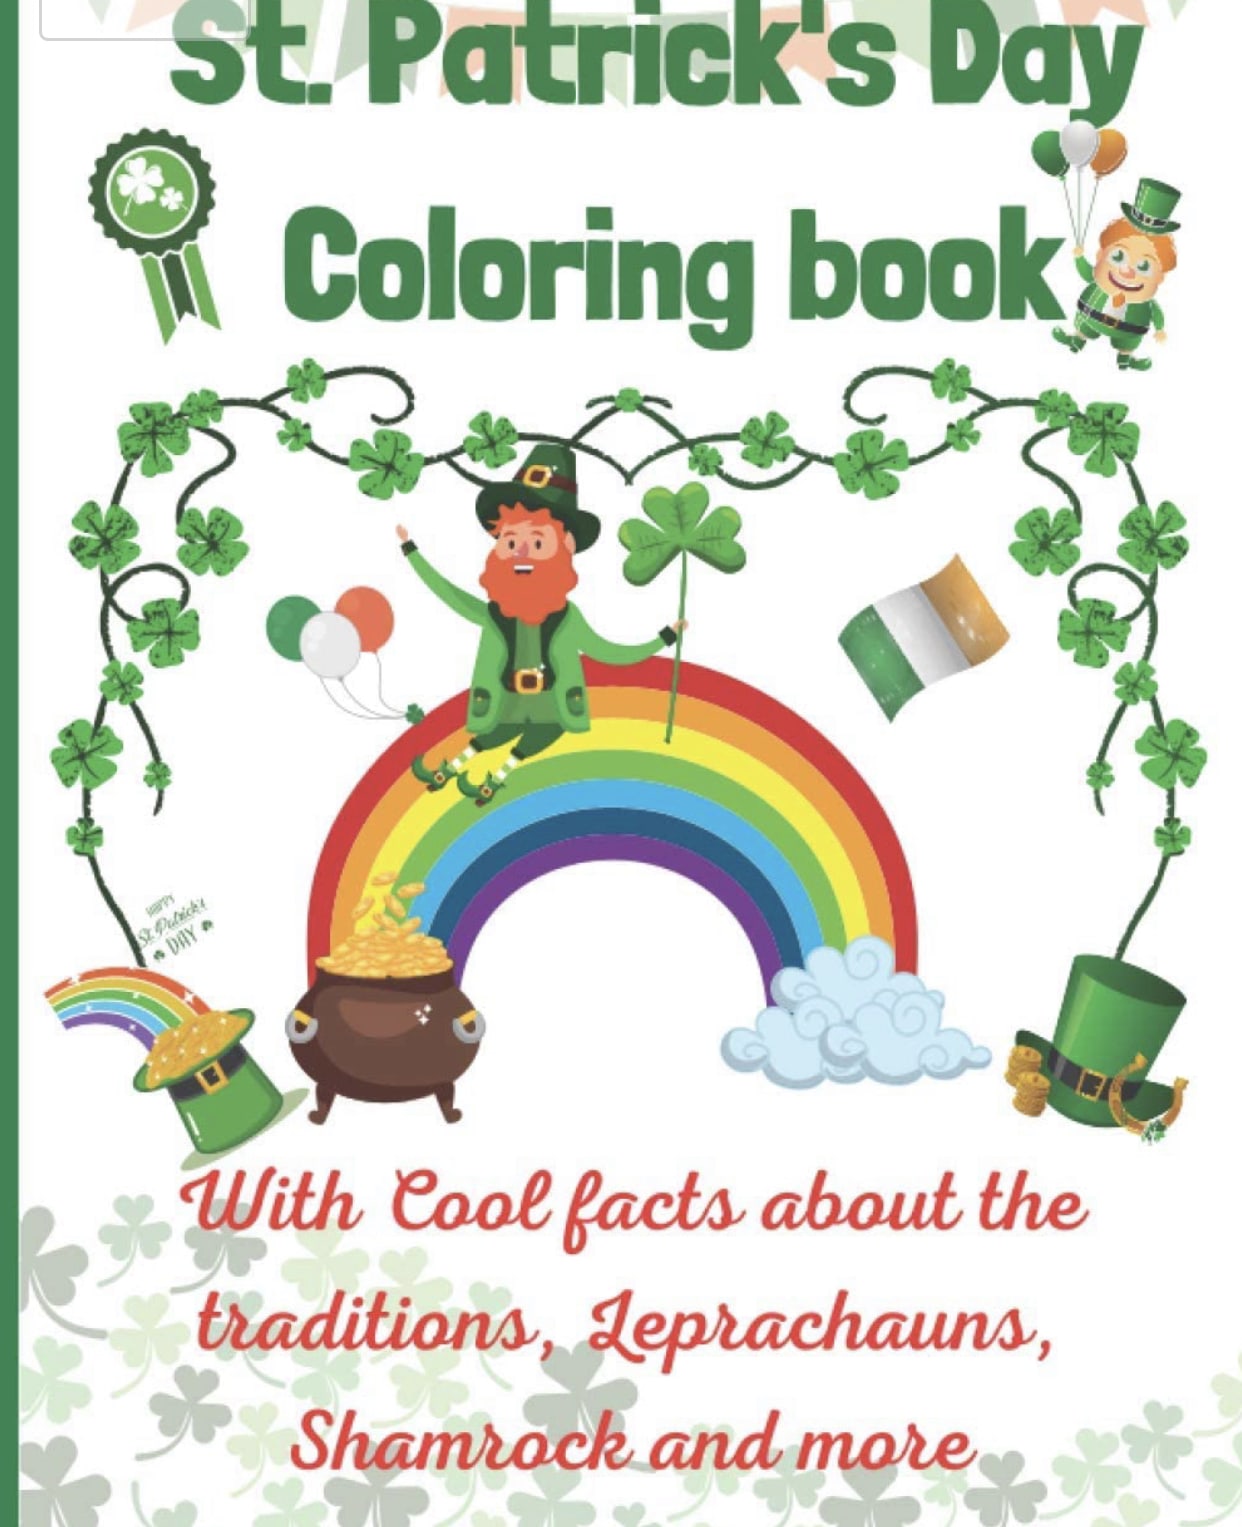 How To Make A Coloring Book In Canva - Coloring Book Fabric Tutorials